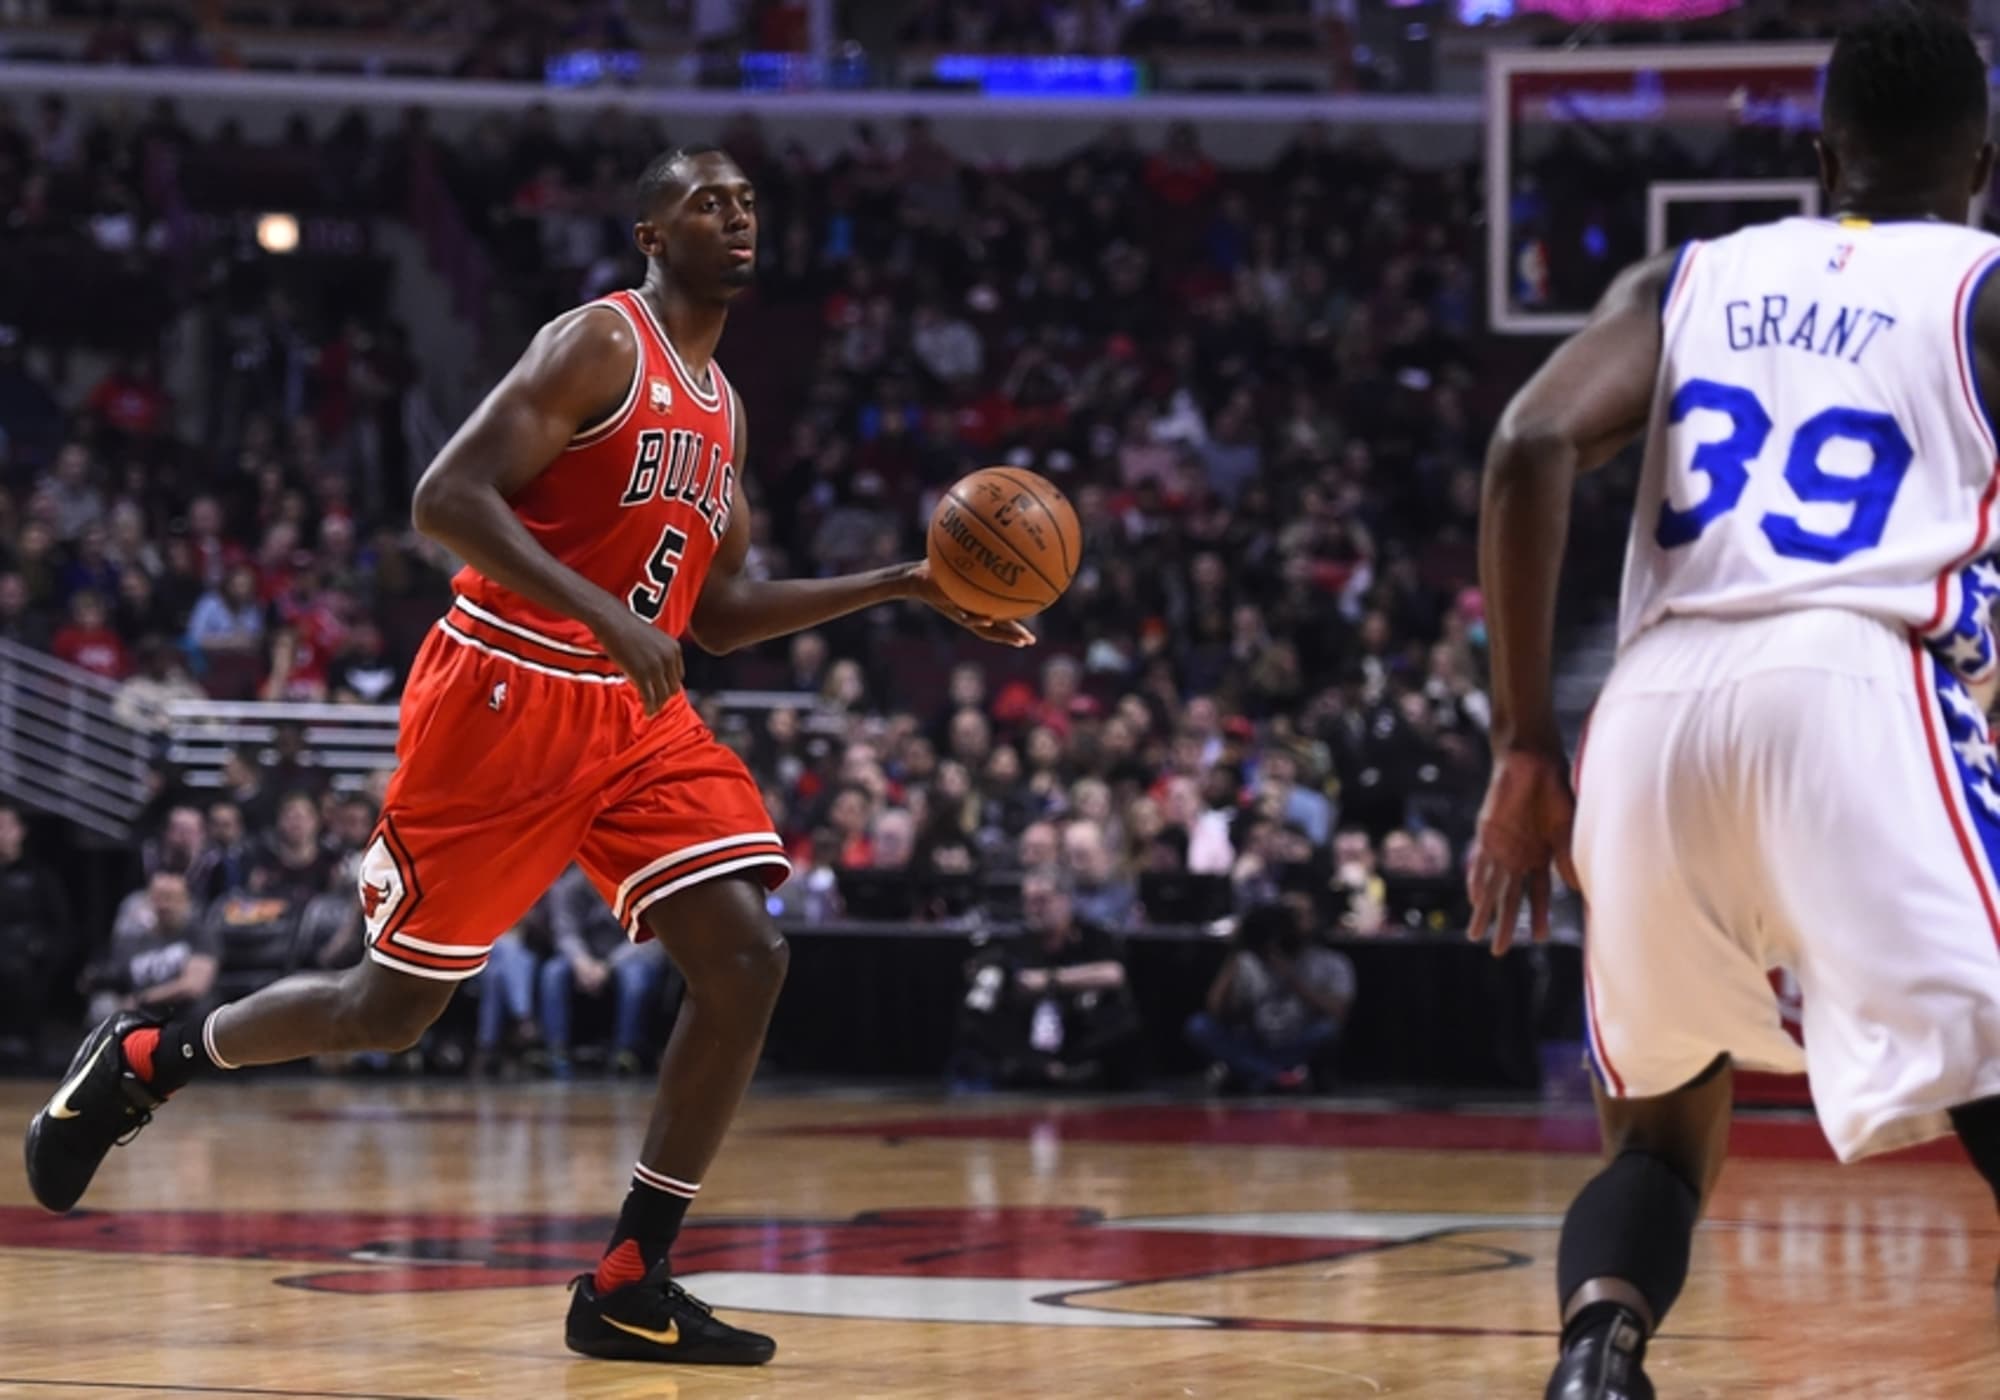 Bobby Portis: How His Game Could Involve into a New Role